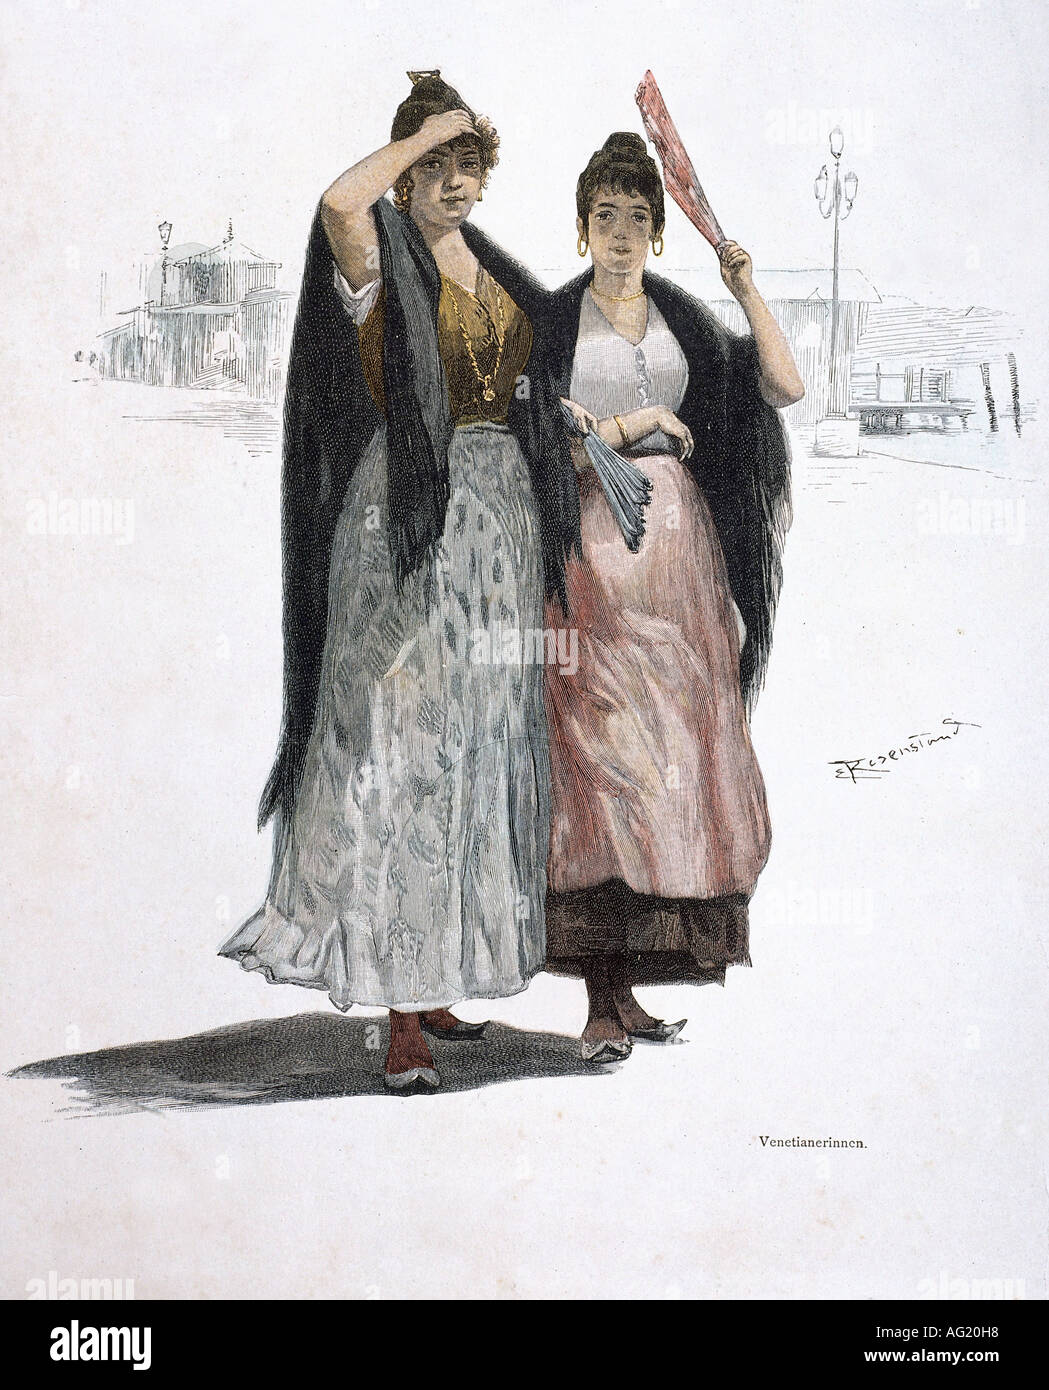 geography/travel, people, women, Venetians, engraving, Germany, late 19th century, Venice, Italians, fashion, costume, historic, historical, Italy, Stock Photo